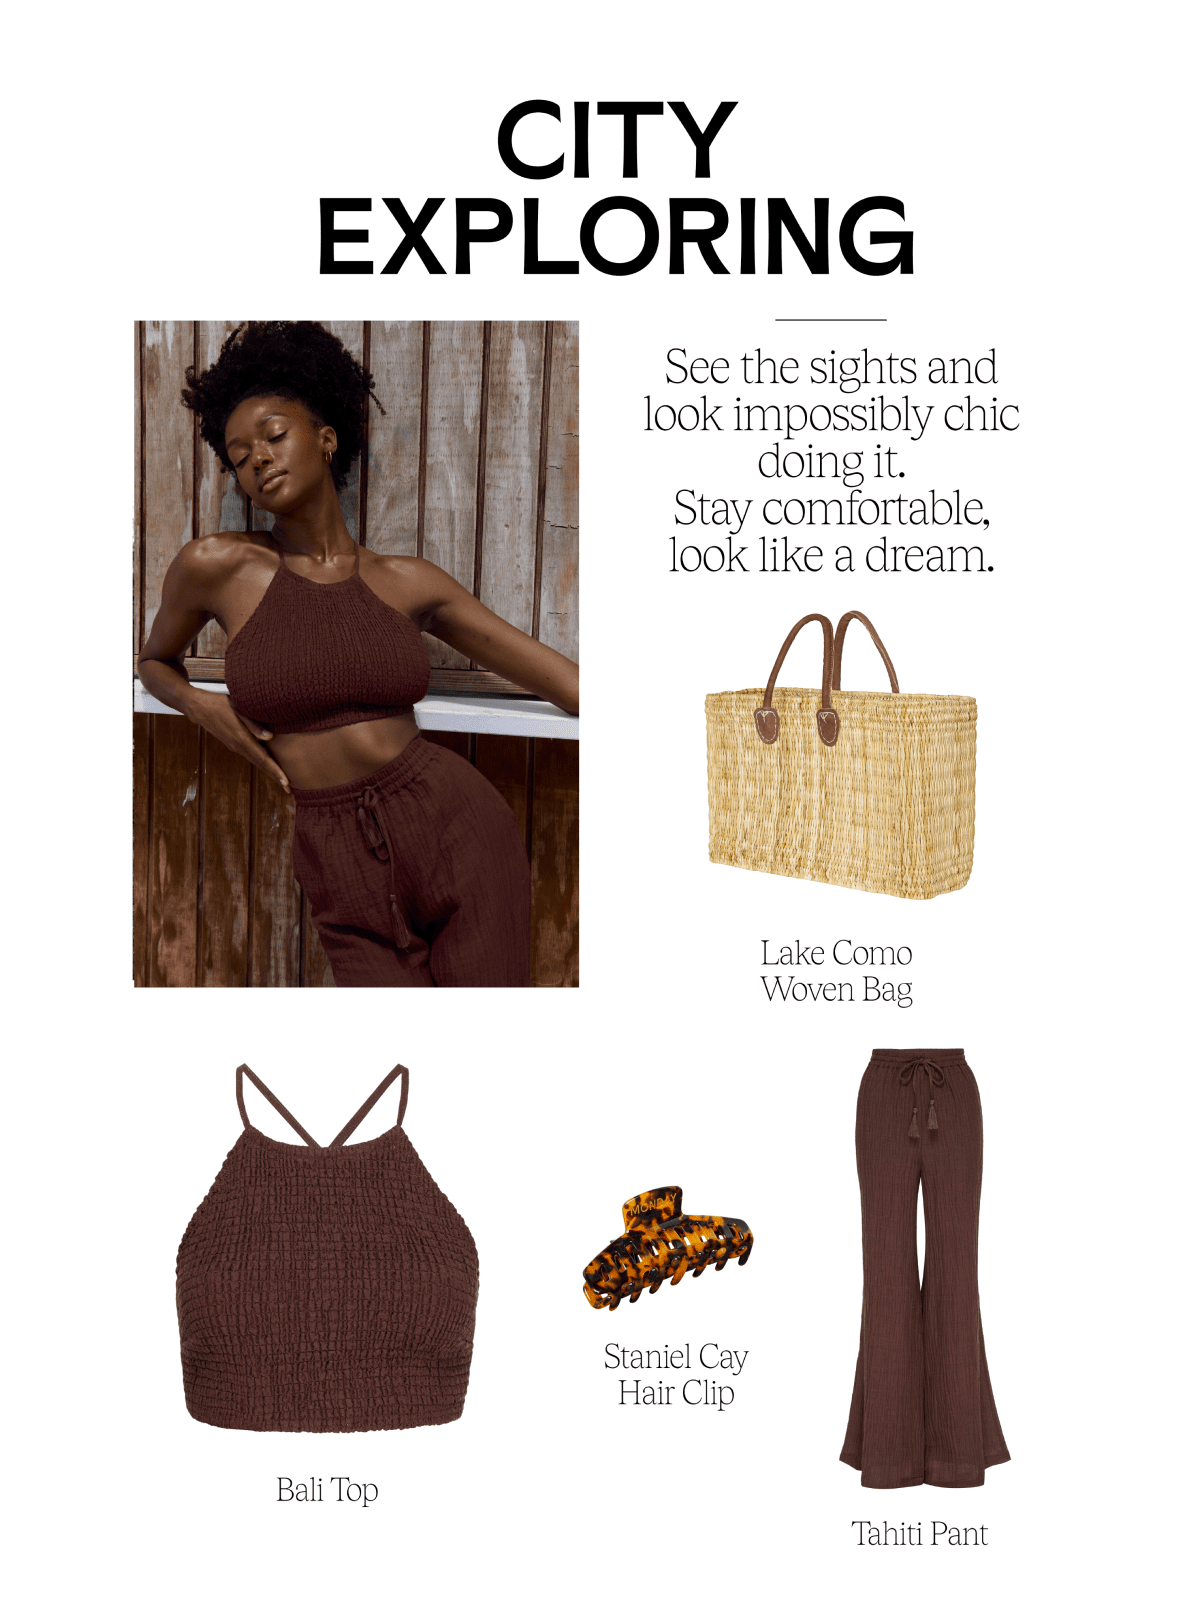 CITY EXPLORING i % f Seethe sights and look impossibly chic doing it. Stay comfortable, look like a dream. Lake Como Woven Bag - Staniel Cay Hair Clip Bali Top Tahiti Pant 